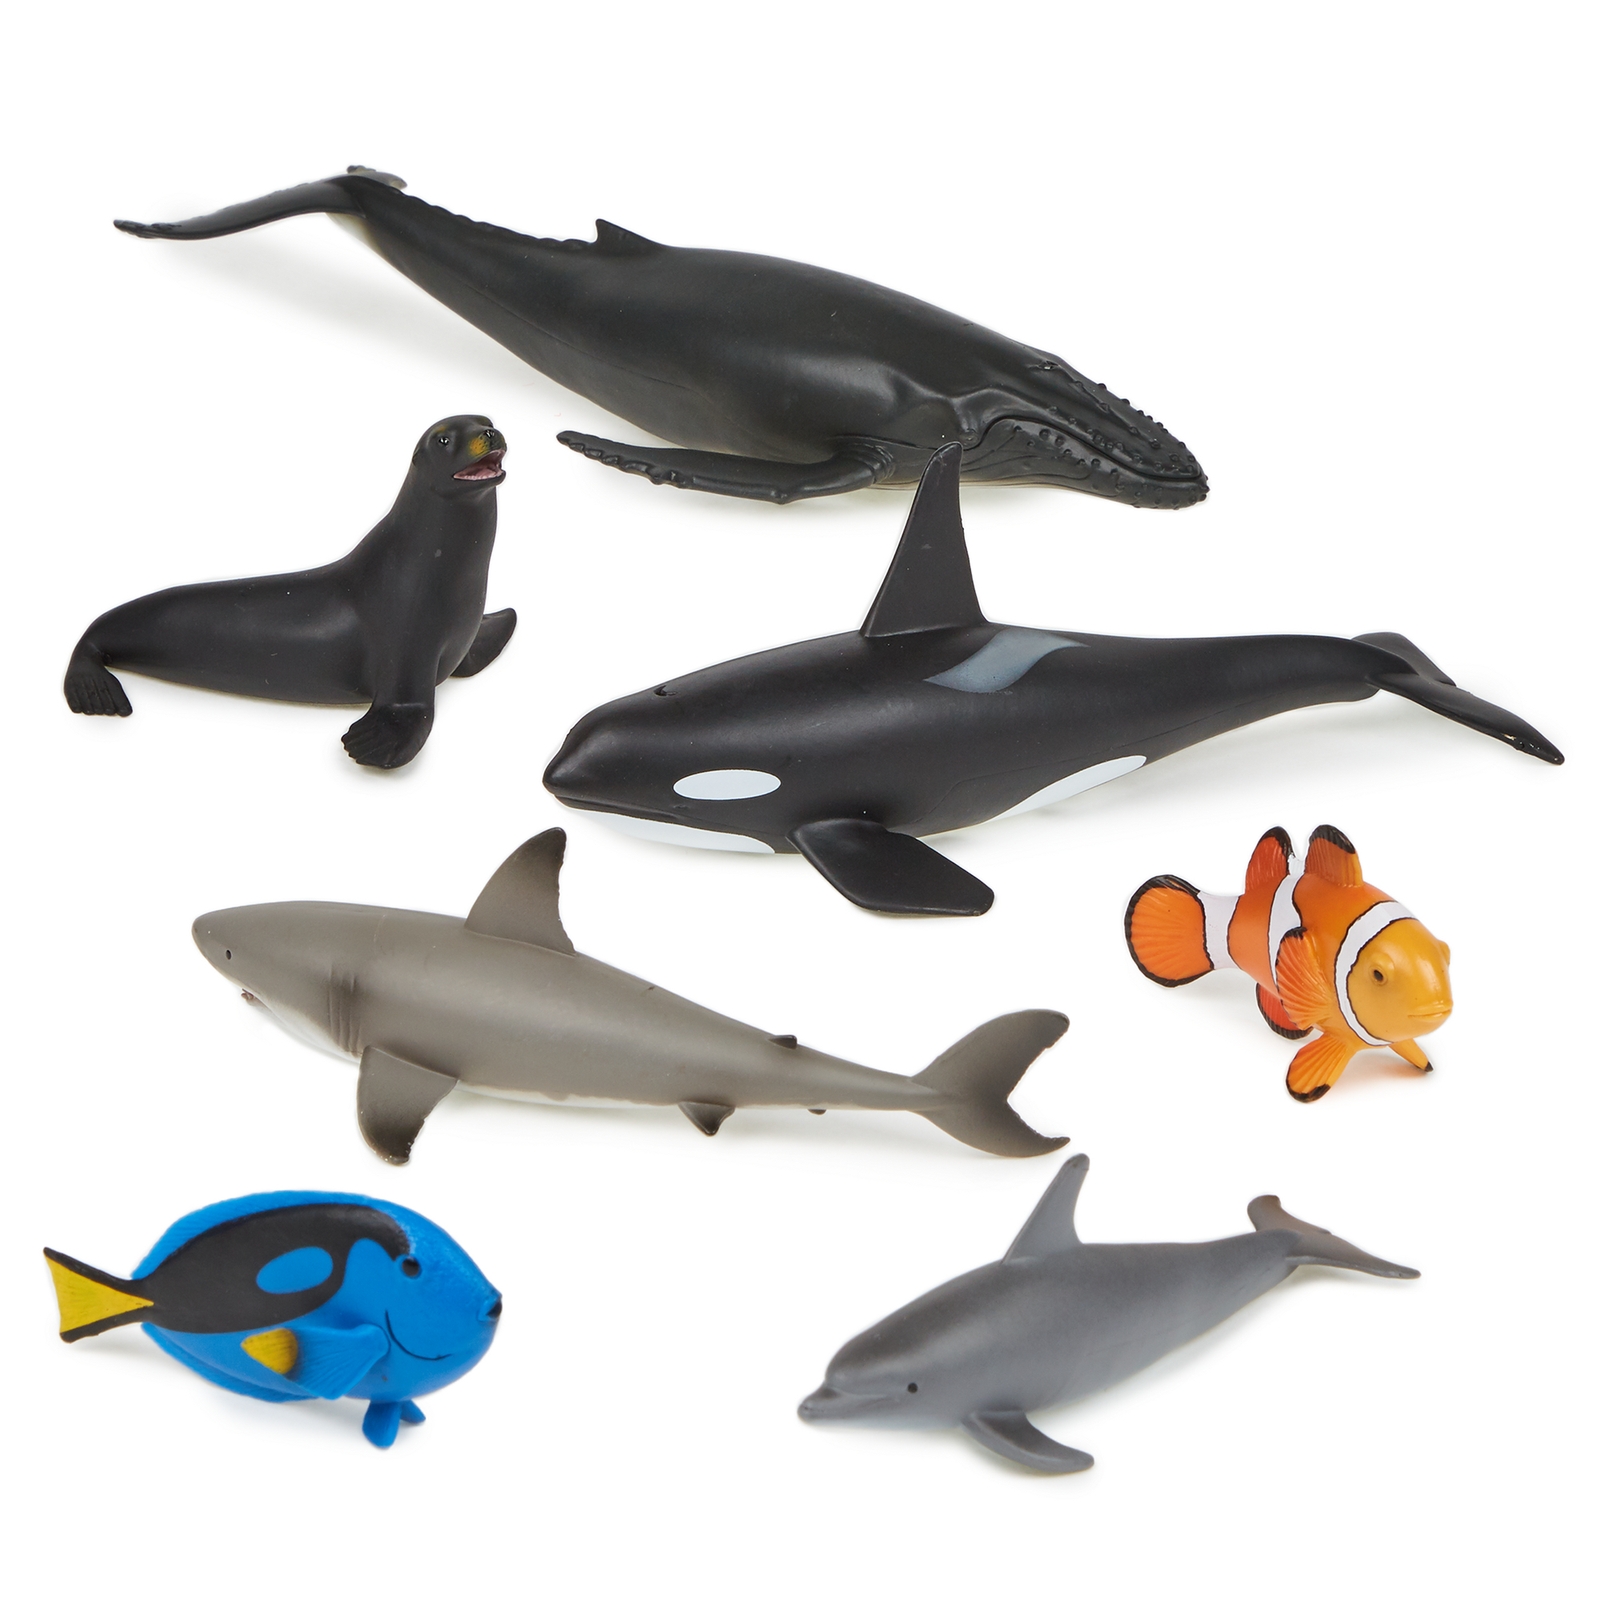 Sealife Animals - Largest 25.5 x 12 x 4.5cm - Assorted - Pack of 7